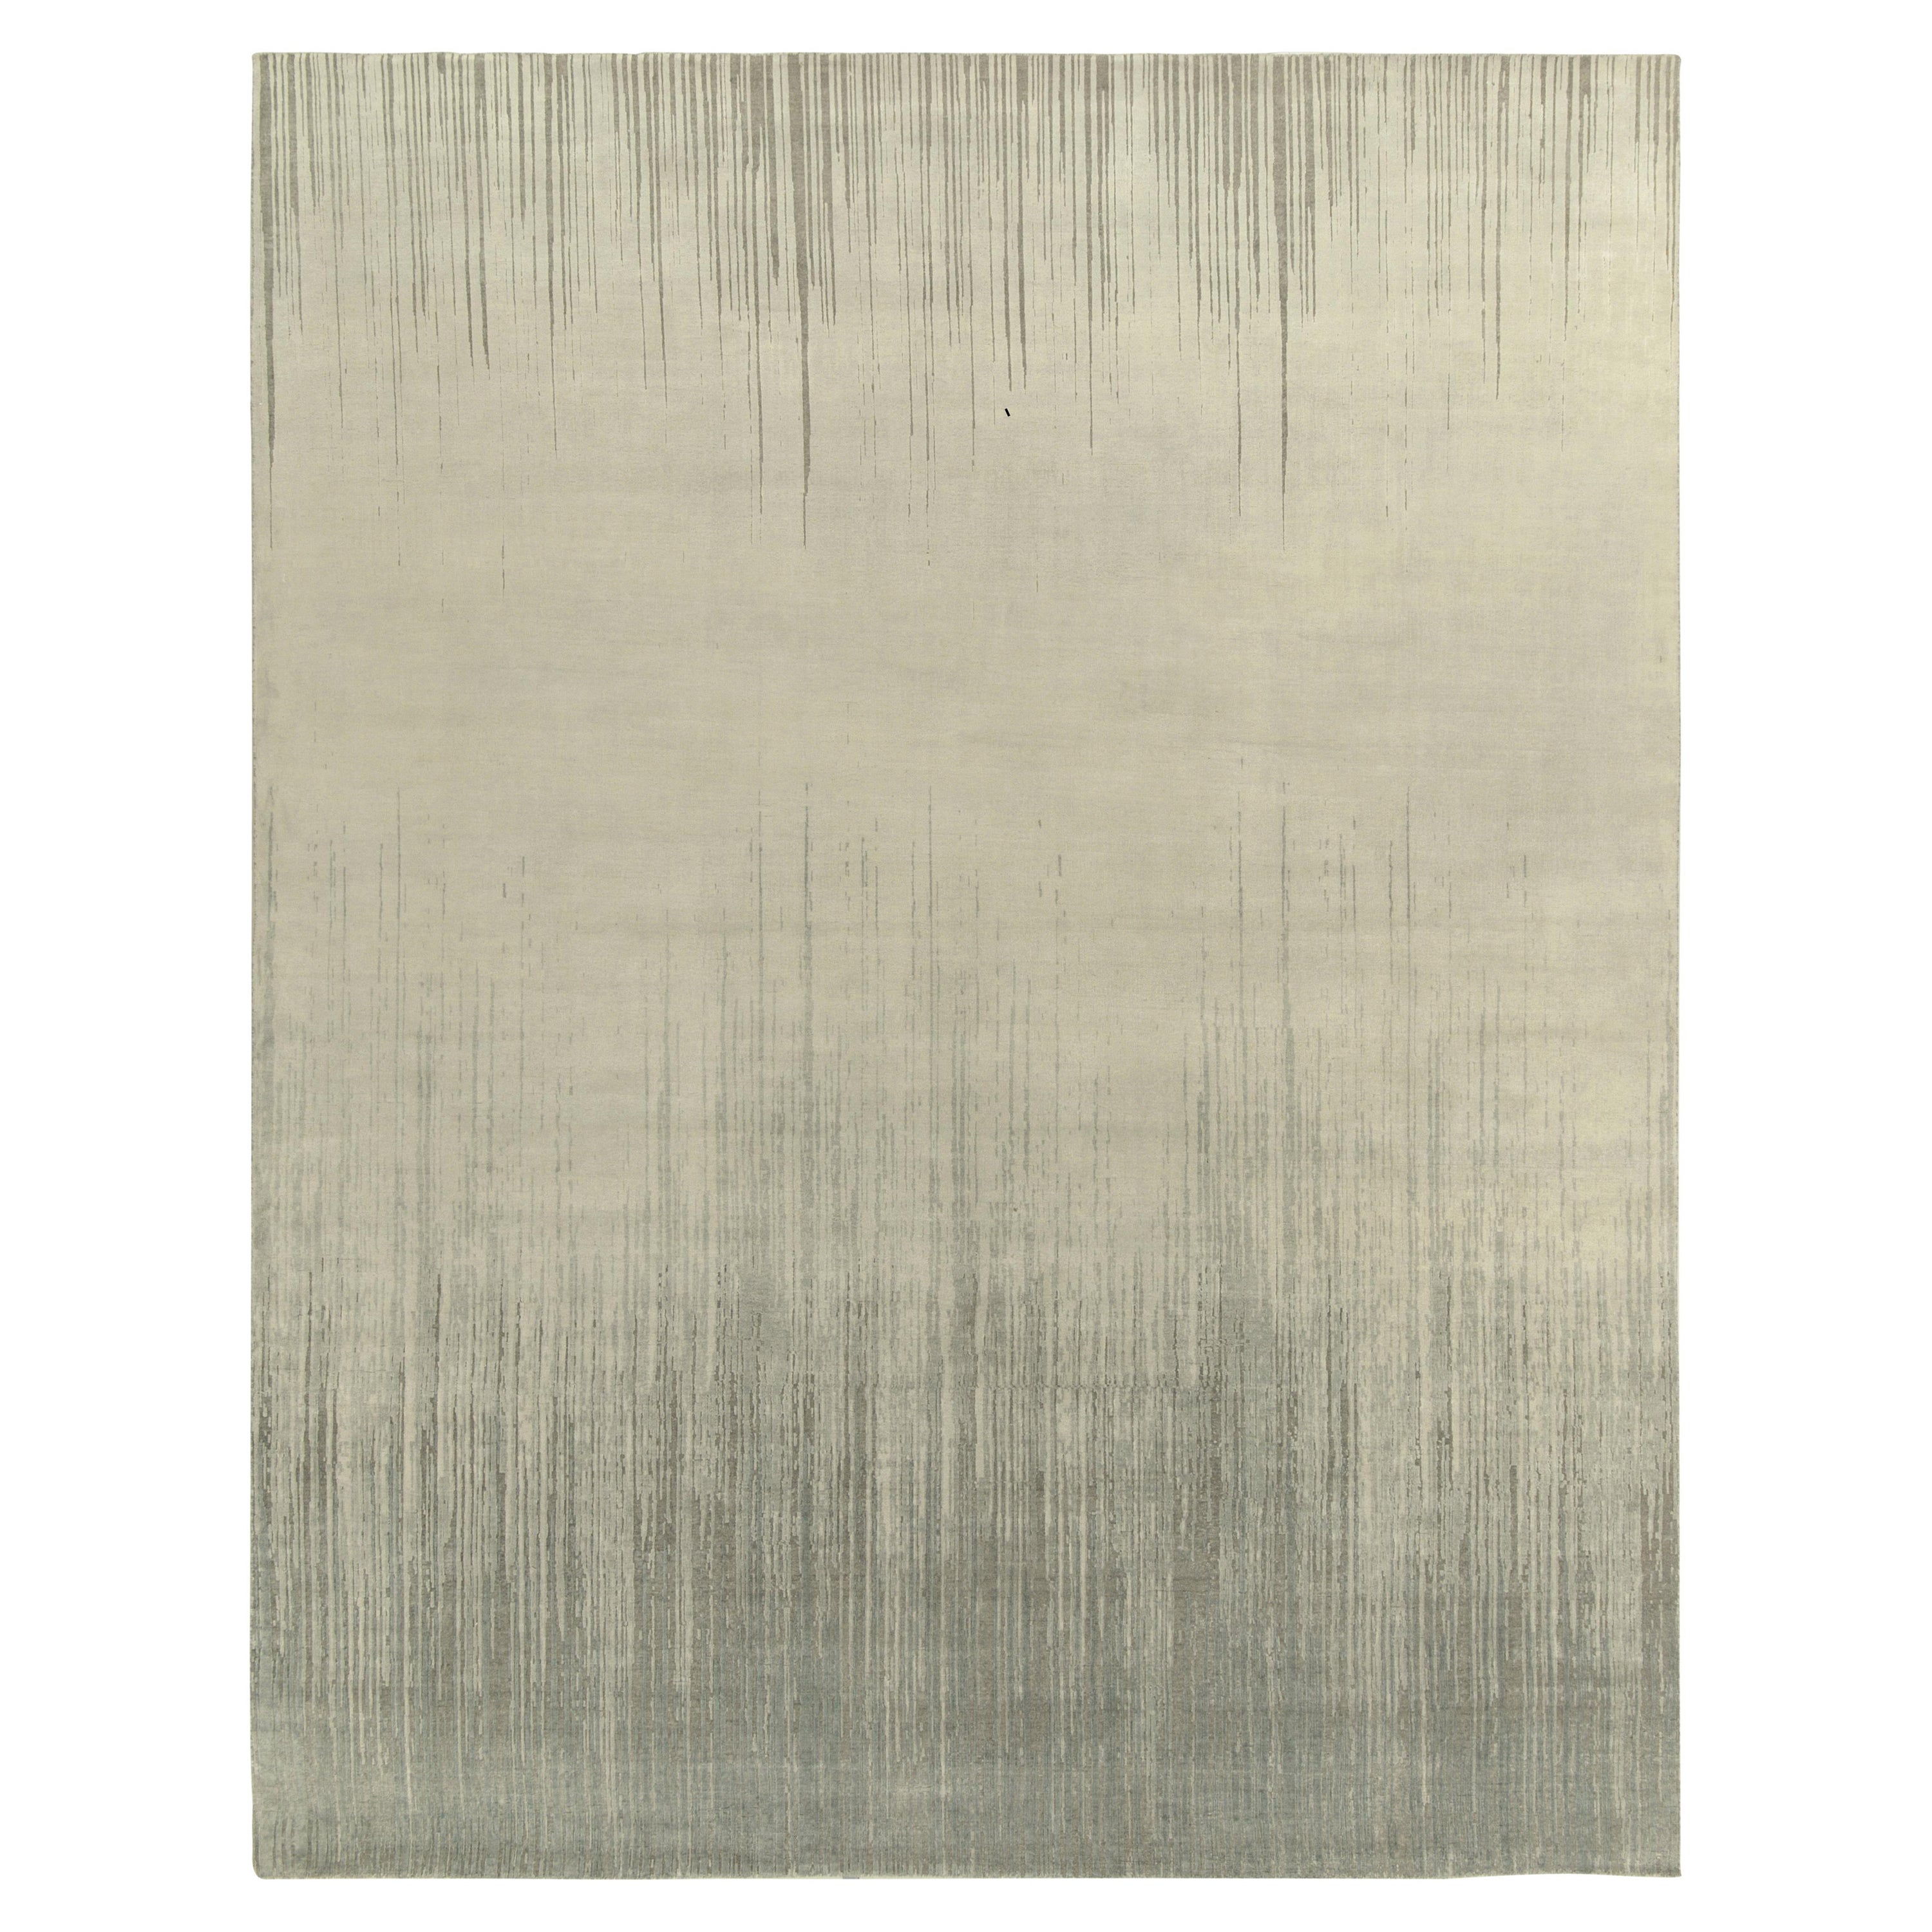 Rug & Kilim’s Modern Abstract Rug in Grey, Beige and Blue Painterly Patterns For Sale